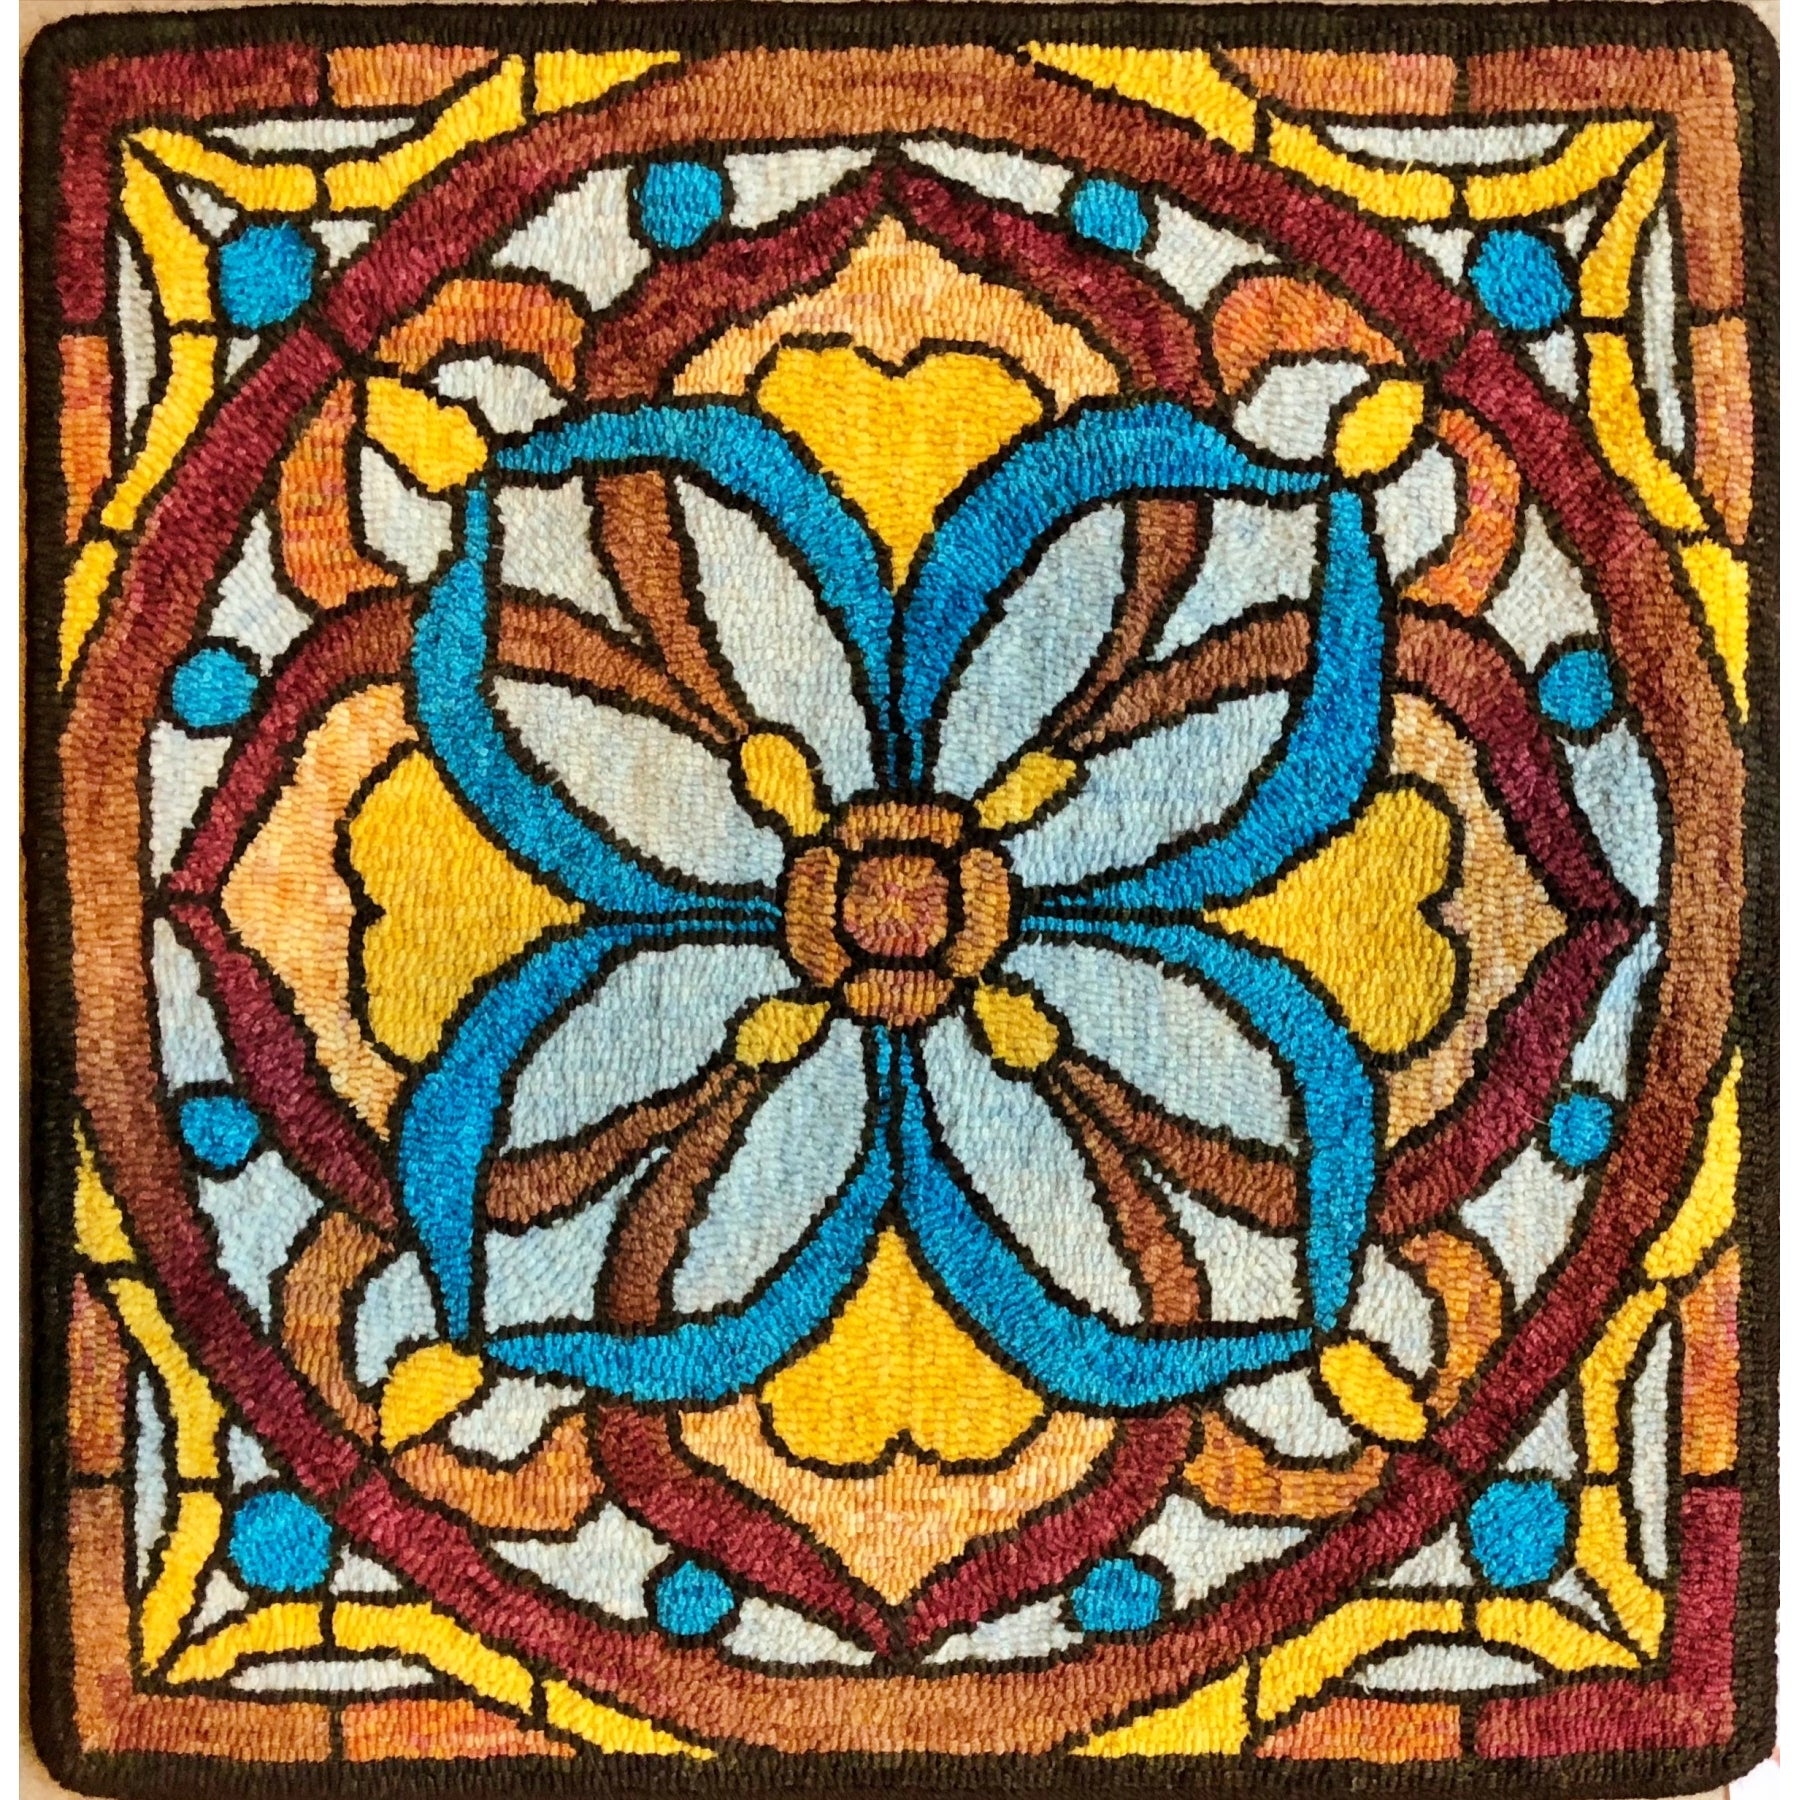 Stained Glass Mosaic, rug hooked by Kathryn Kovaric